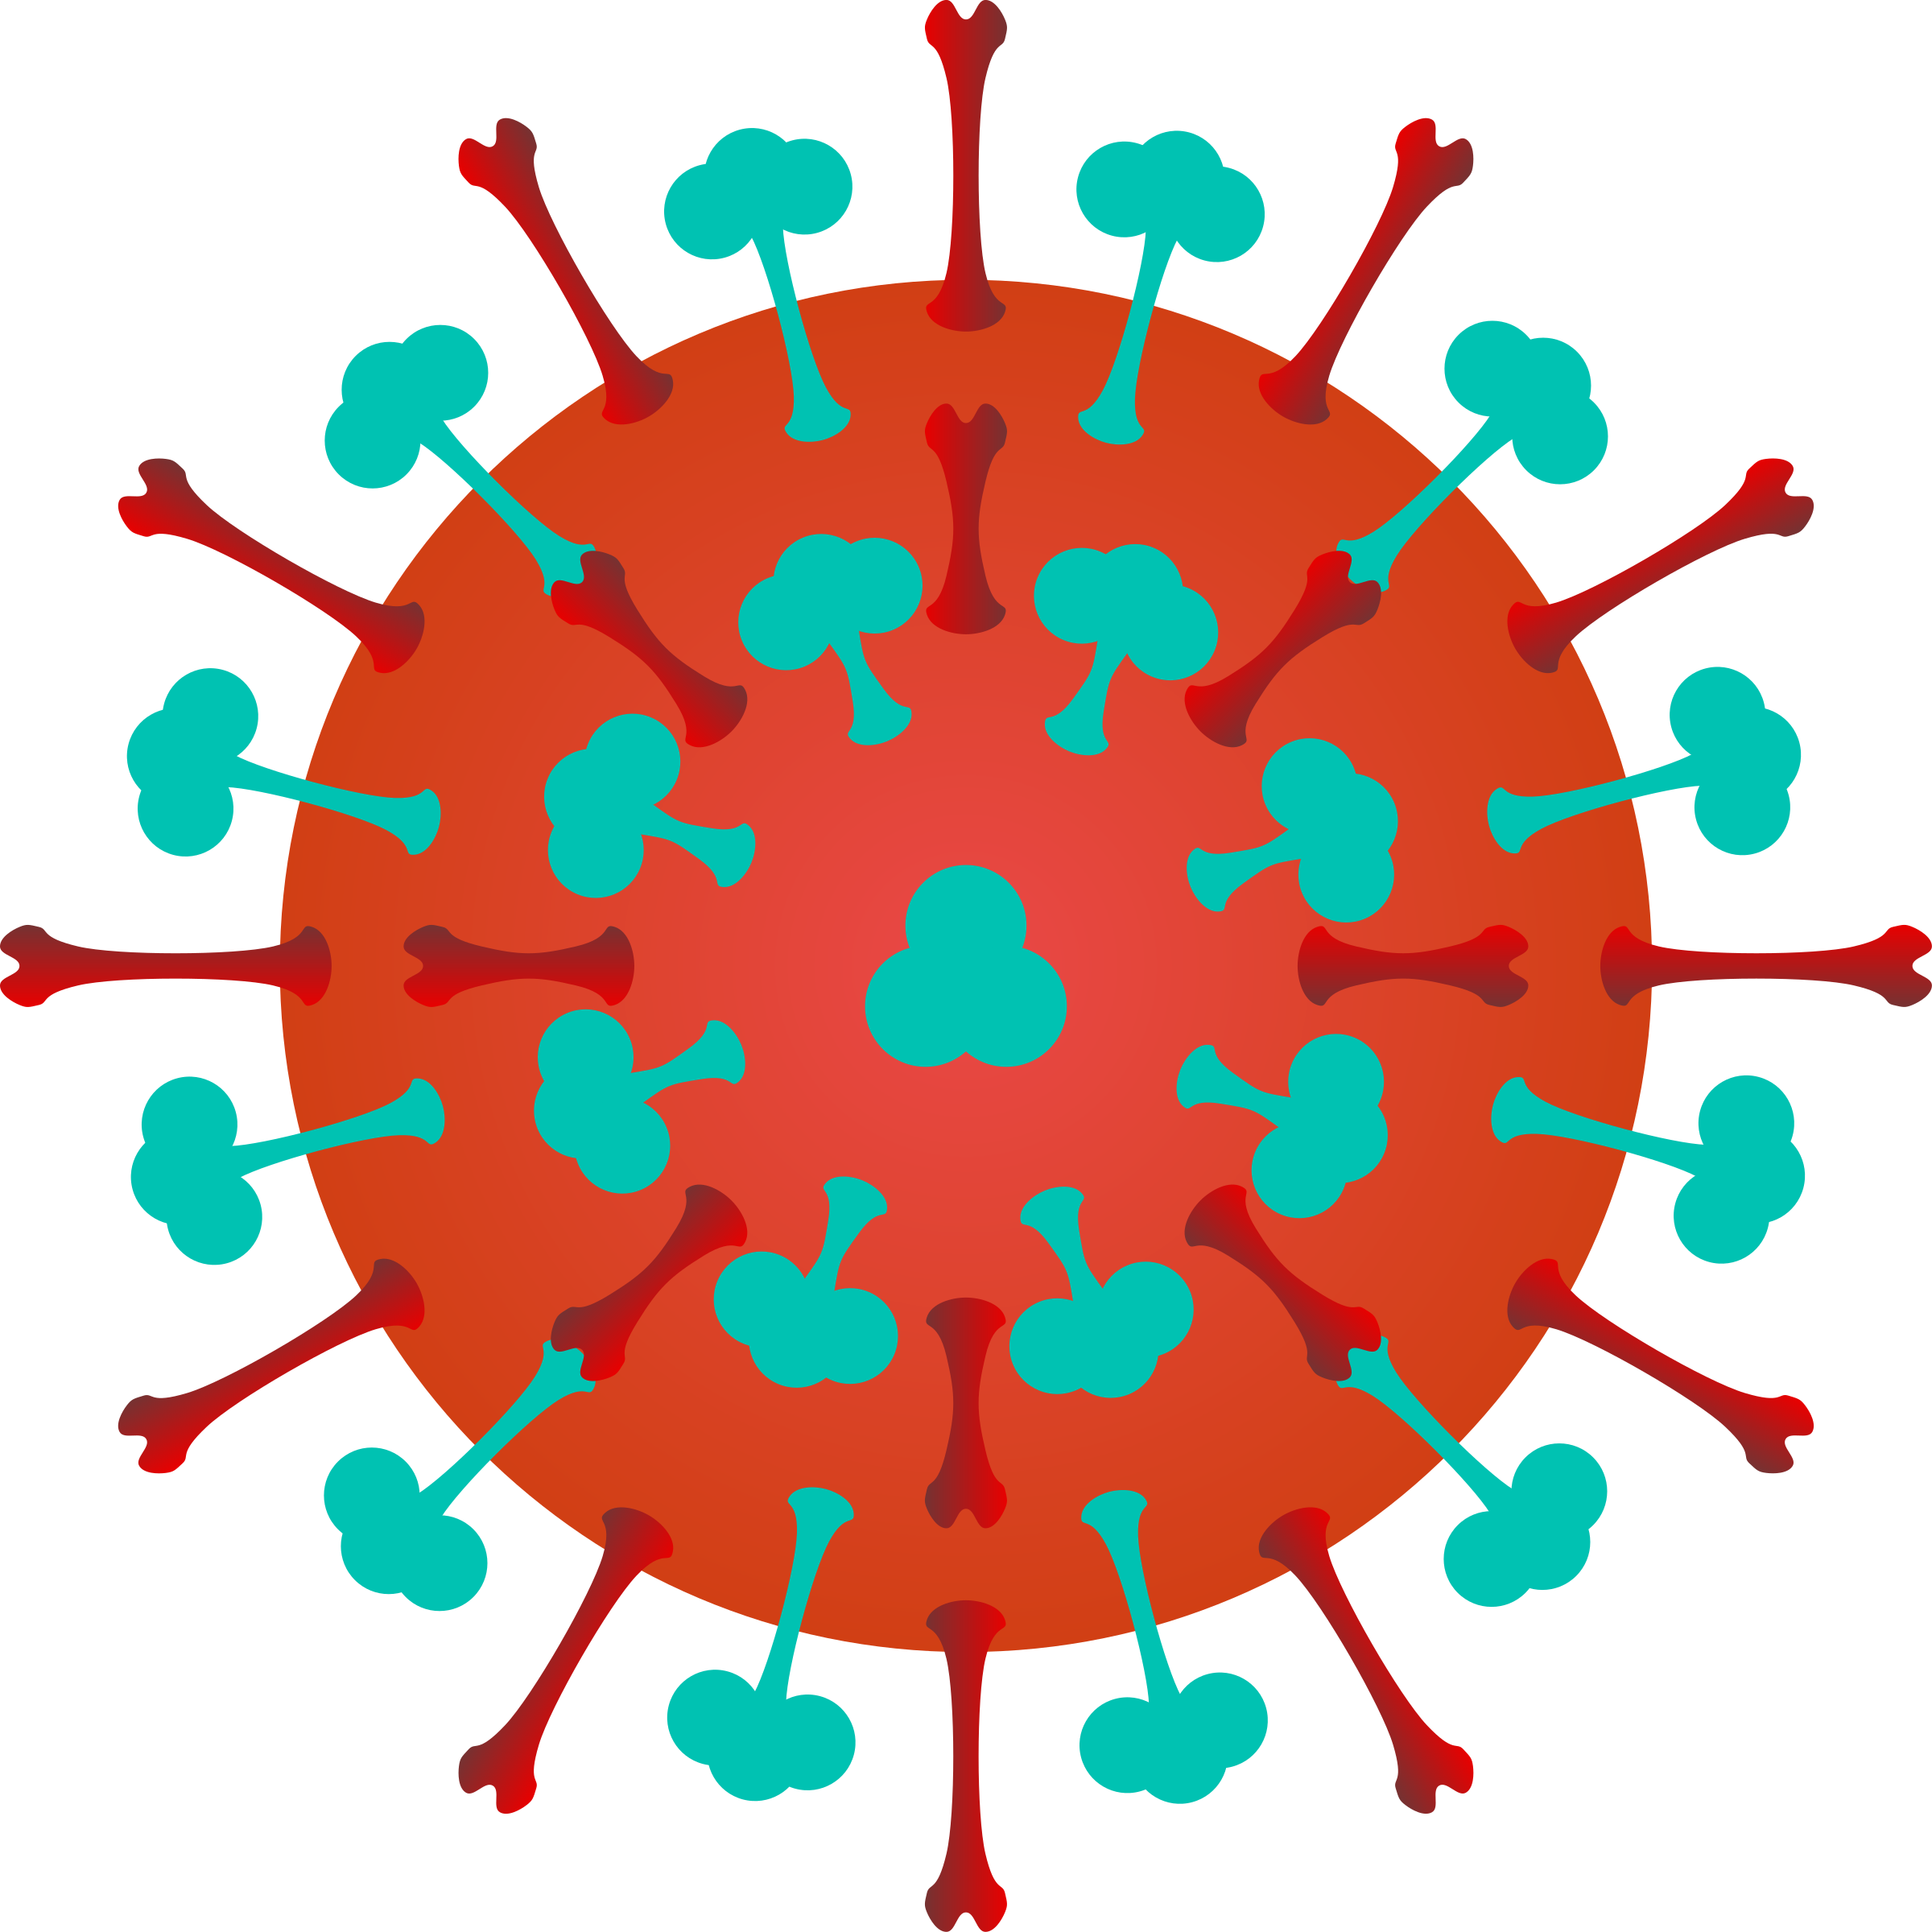 Bacteria clipart virus. Free download best on